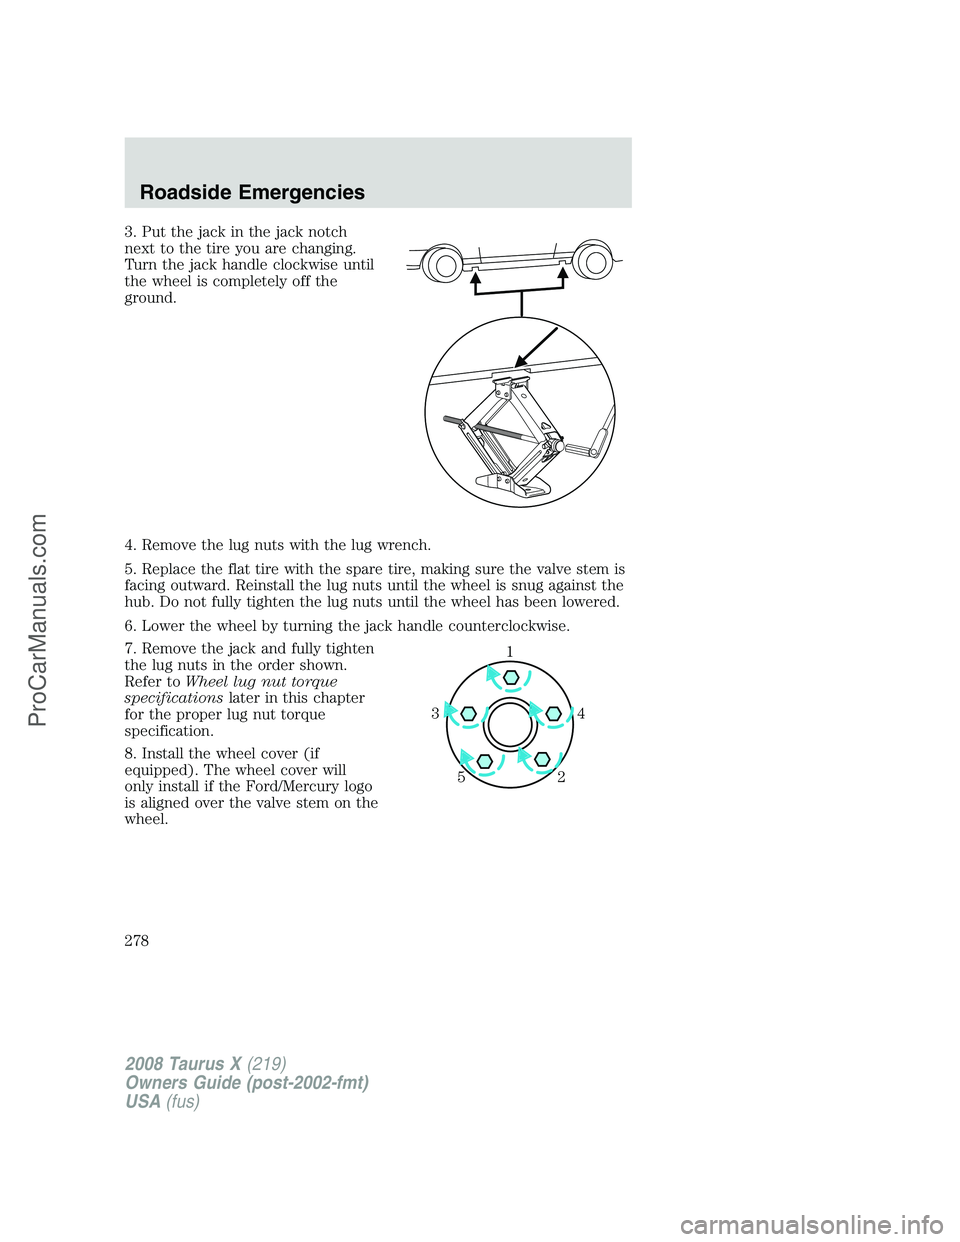 FORD FREESTYLE 2008  Owners Manual 3. Put the jack in the jack notch
next to the tire you are changing.
Turn the jack handle clockwise until
the wheel is completely off the
ground.
4. Remove the lug nuts with the lug wrench.
5. Replace